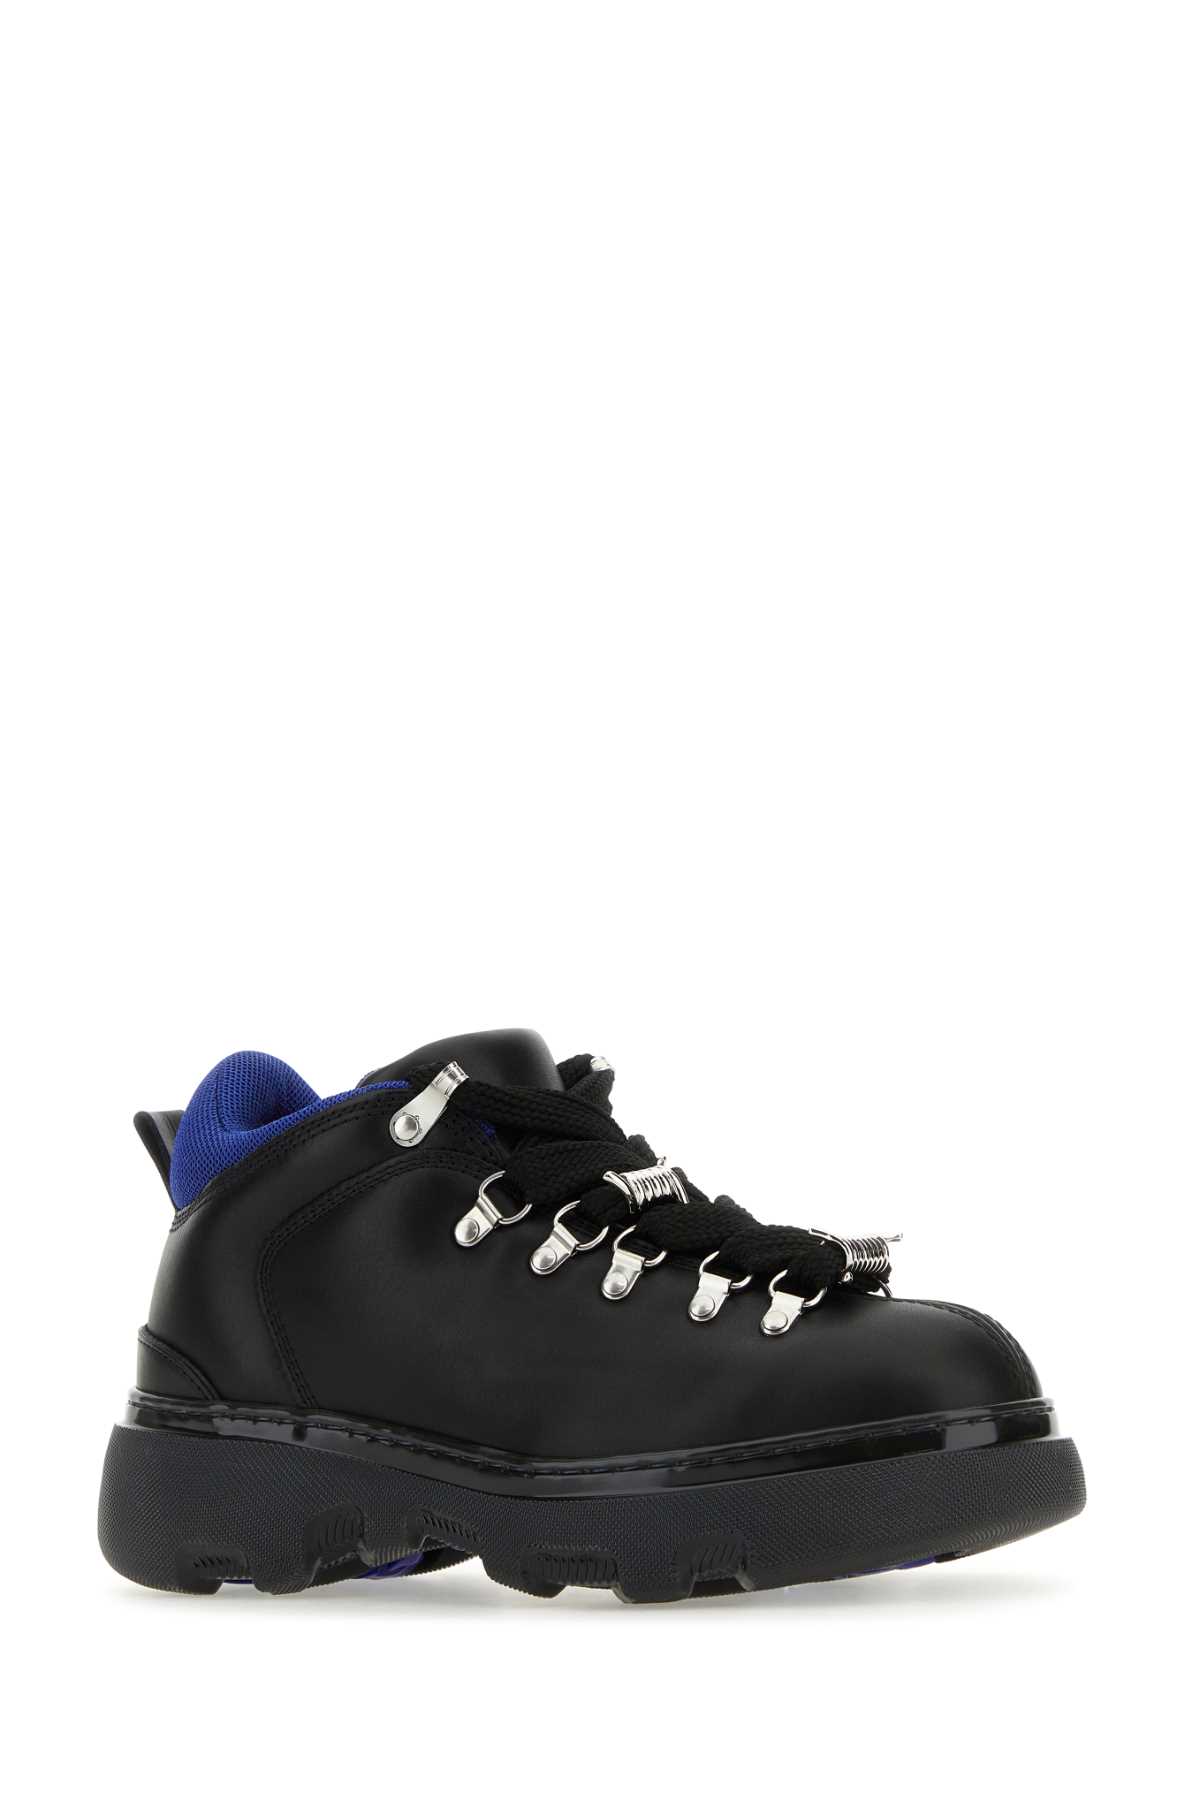 Burberry Black Leather Lace-up Shoes